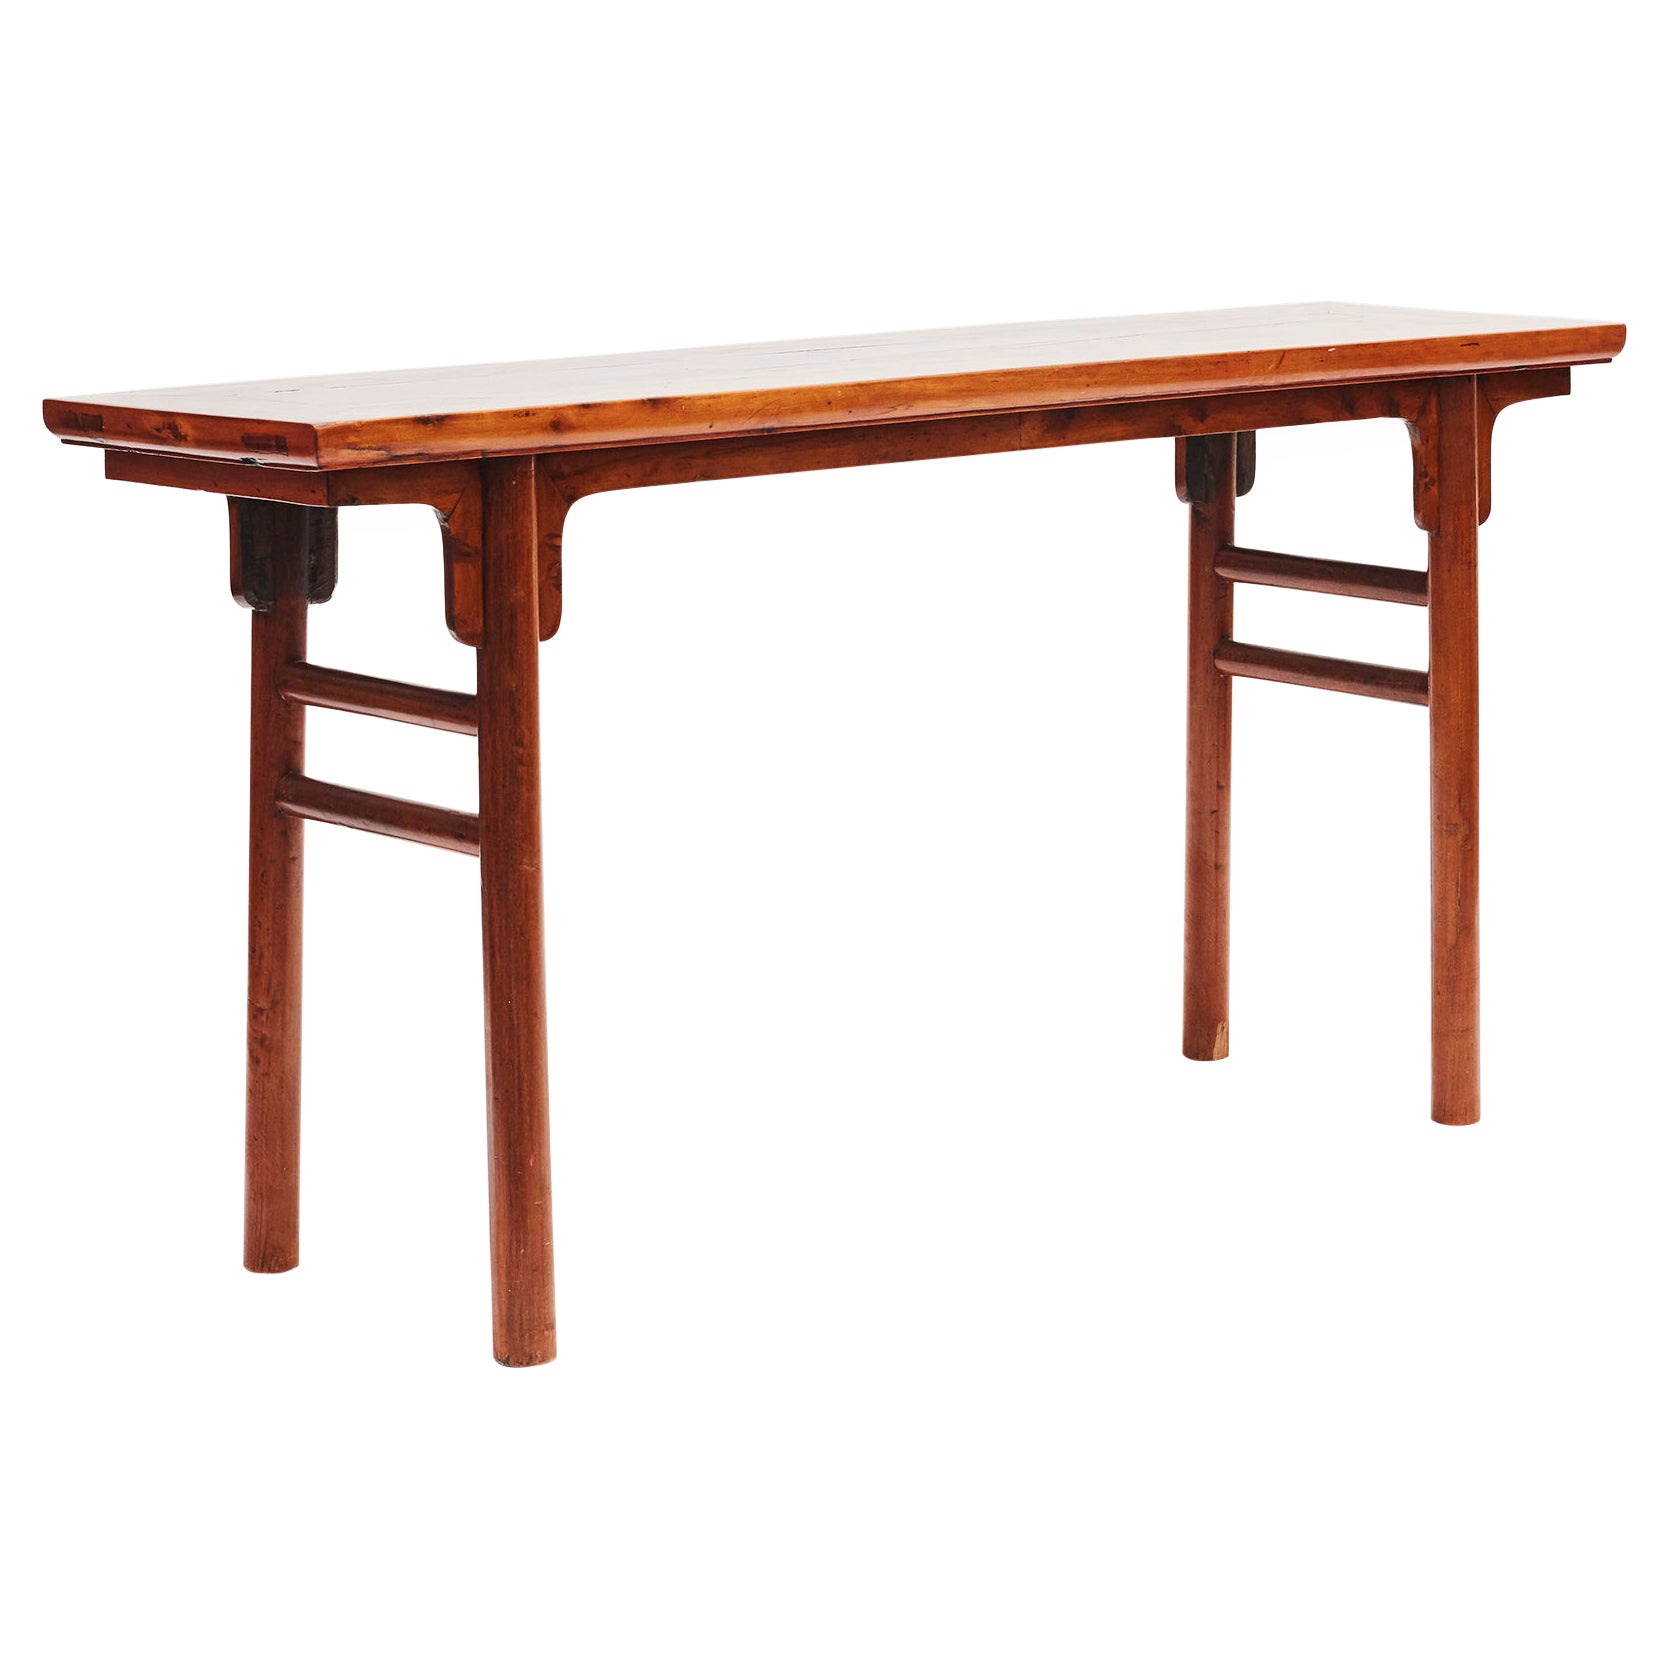 19th Century Chinese Ming Style Peach Wood Altar Table